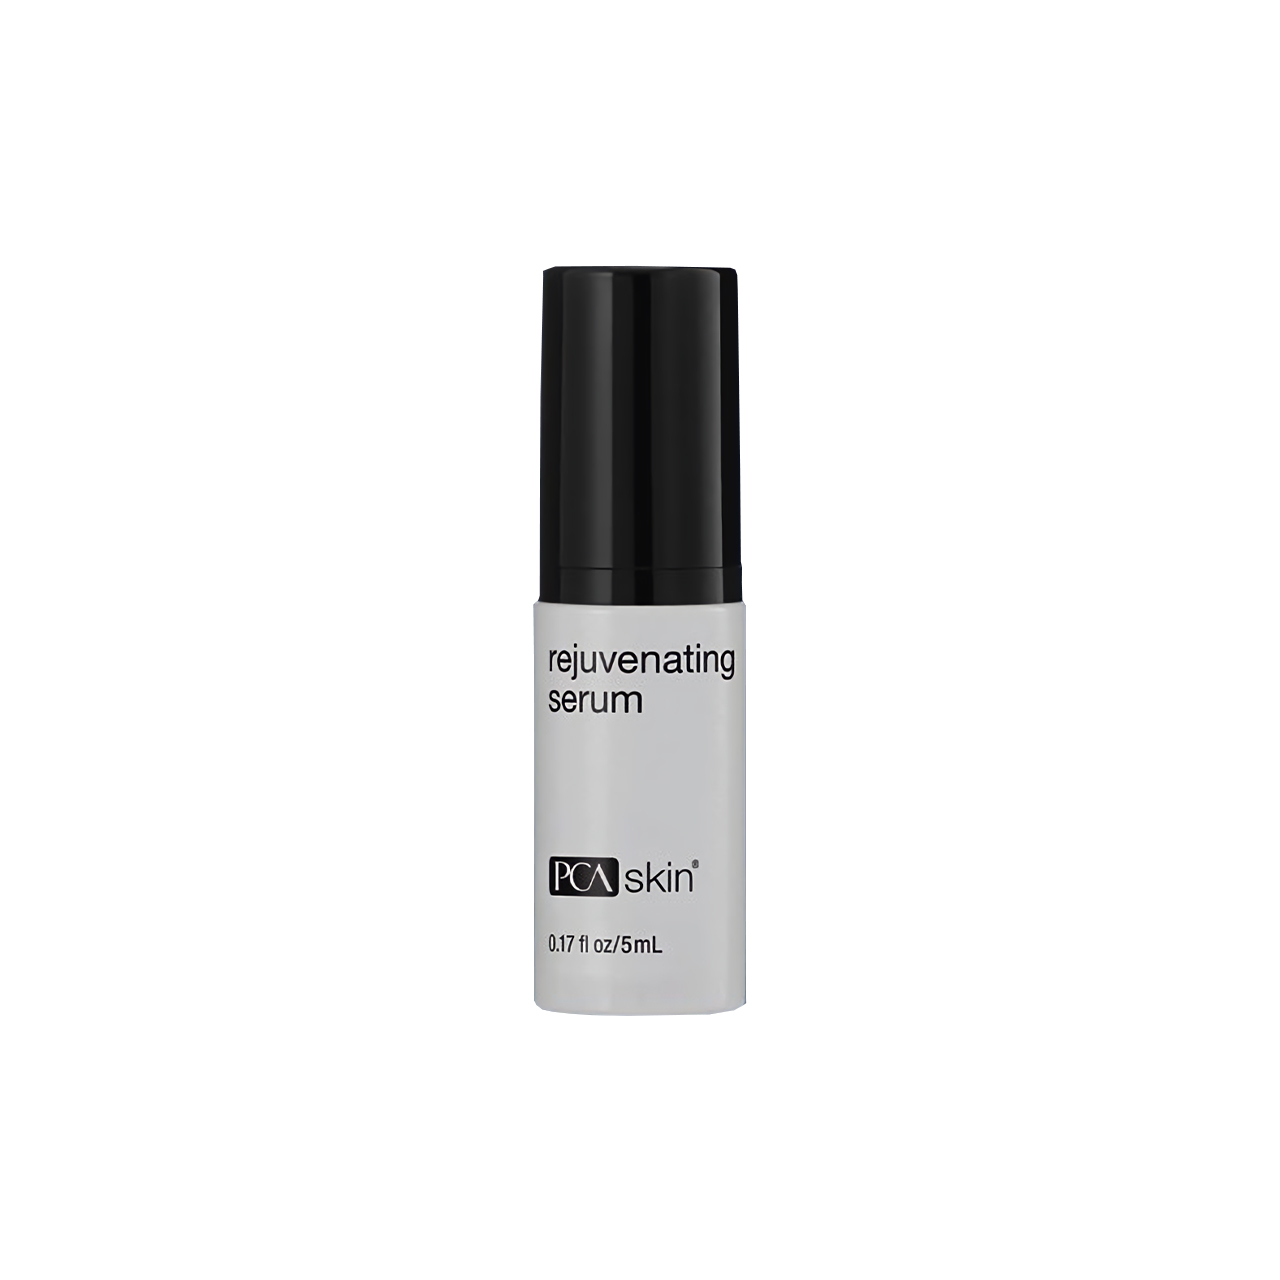 PCA Skin Rejuvenating Serum - Travel size Exp:5/24 Questions & Answers